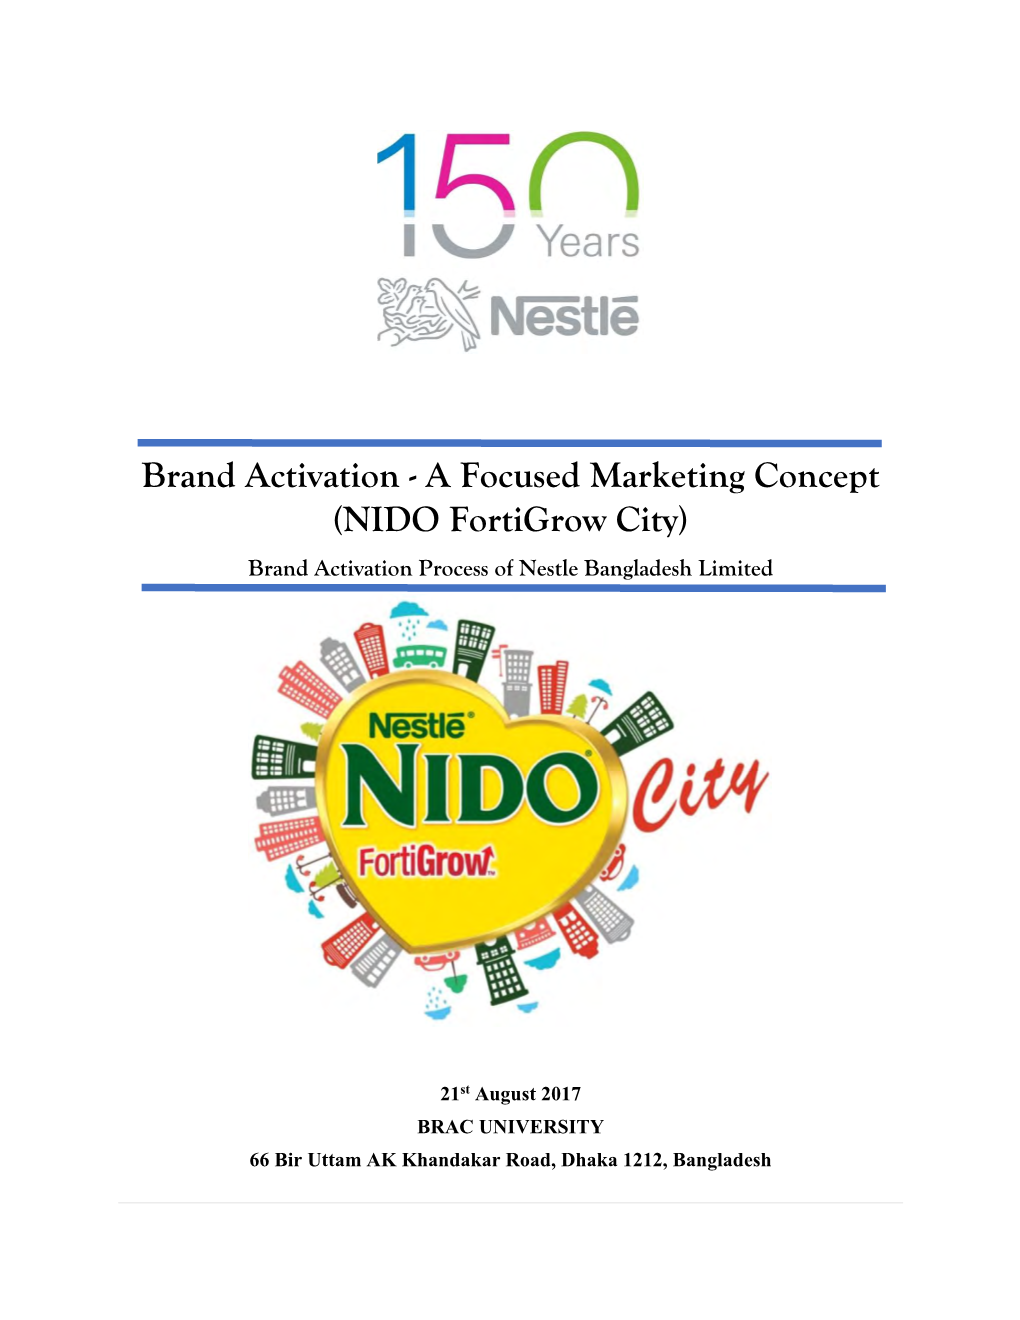 Brand Activation - a Focused Marketing Concept (NIDO Fortigrow City) Brand Activation Process of Nestle Bangladesh Limited